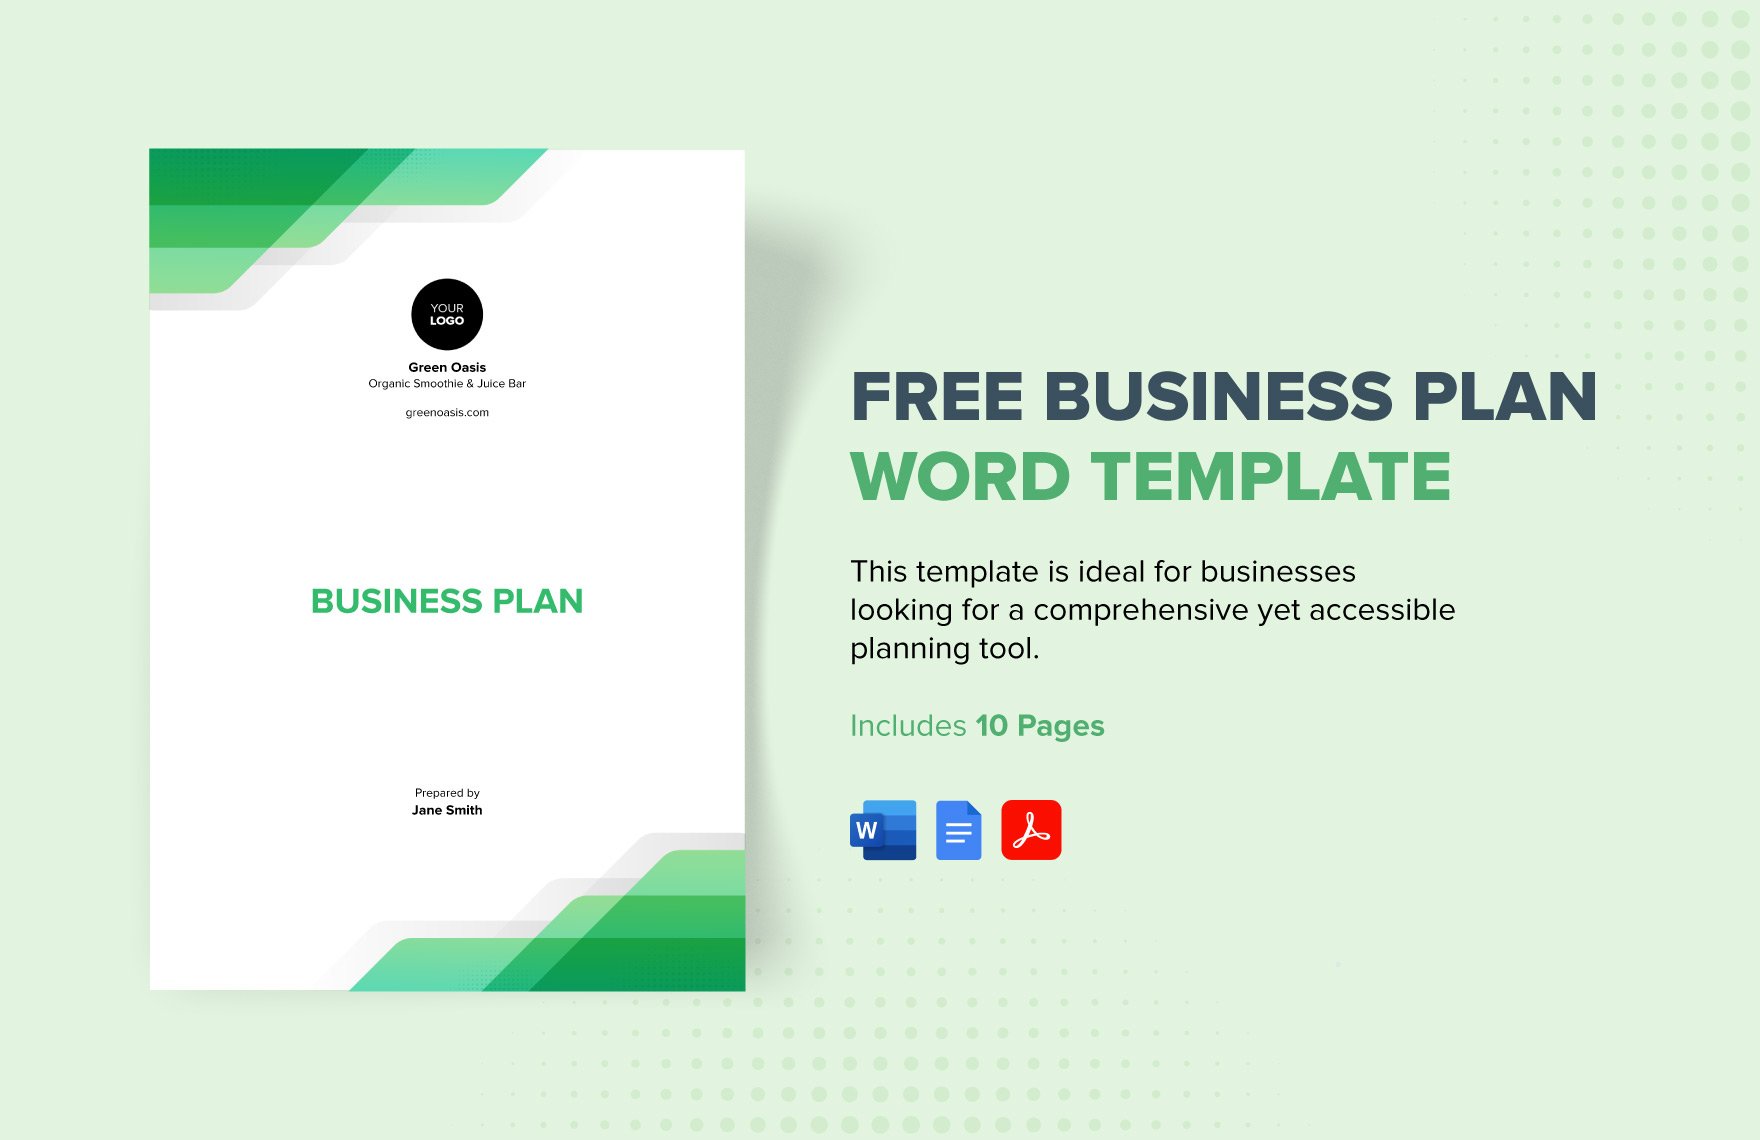 Business Plan Template in Word